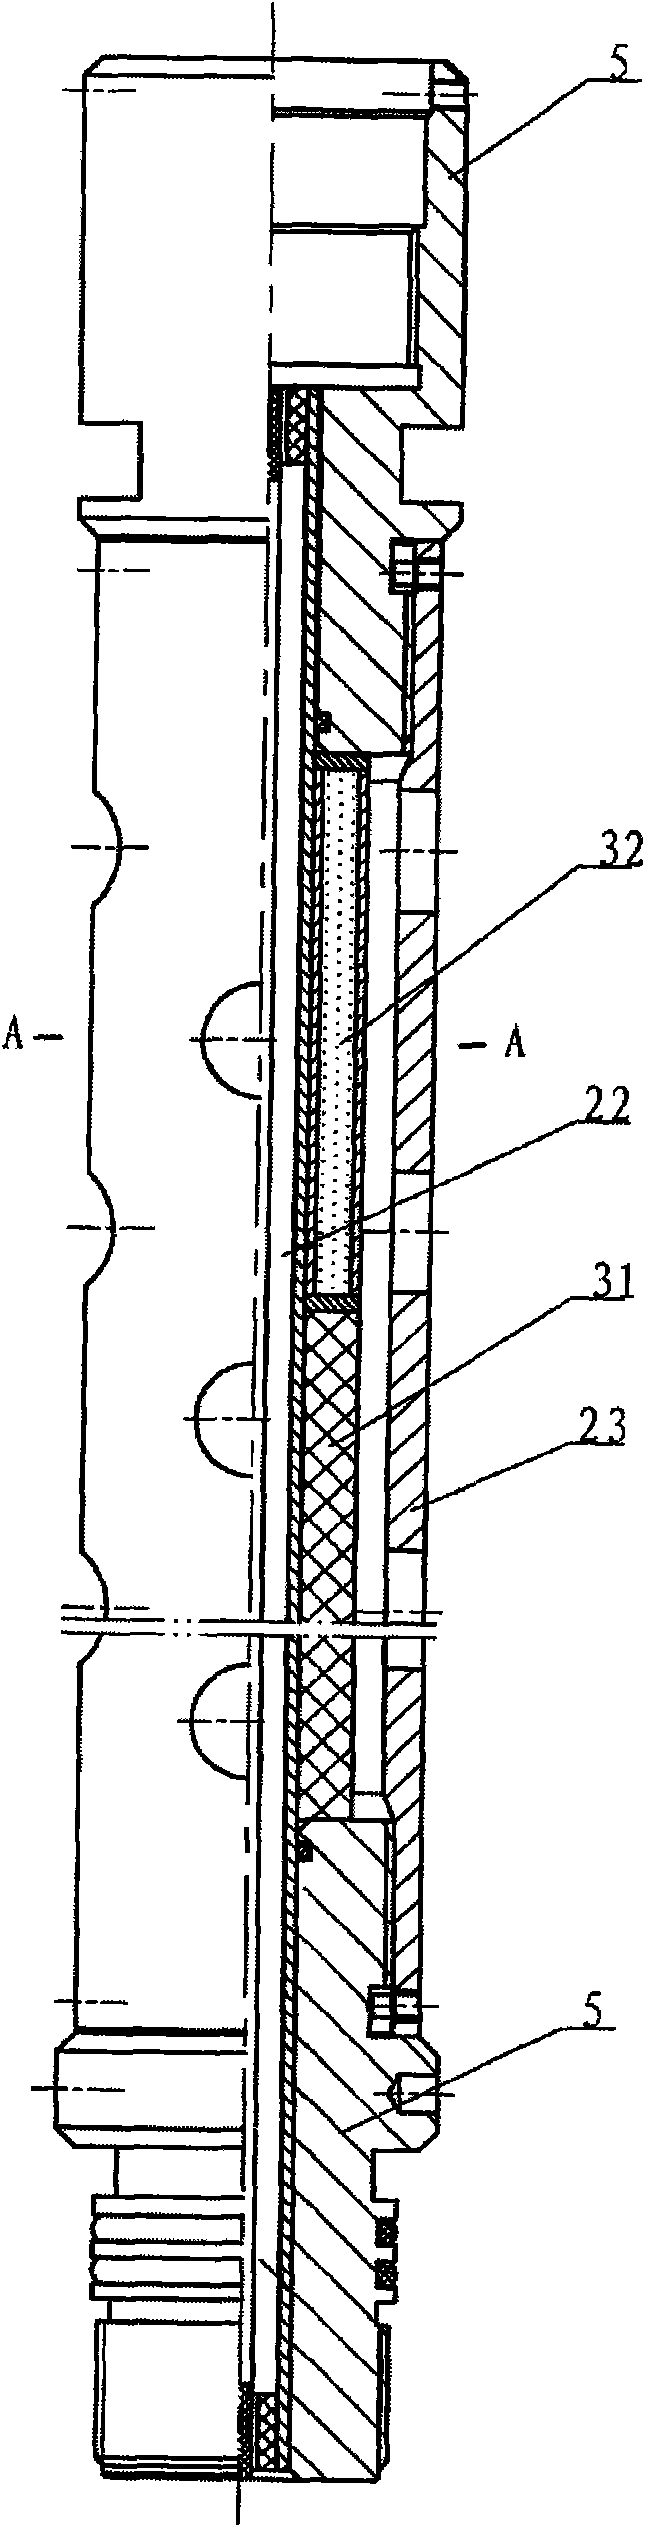 Pulse fracturing sand injector for horizontal wells